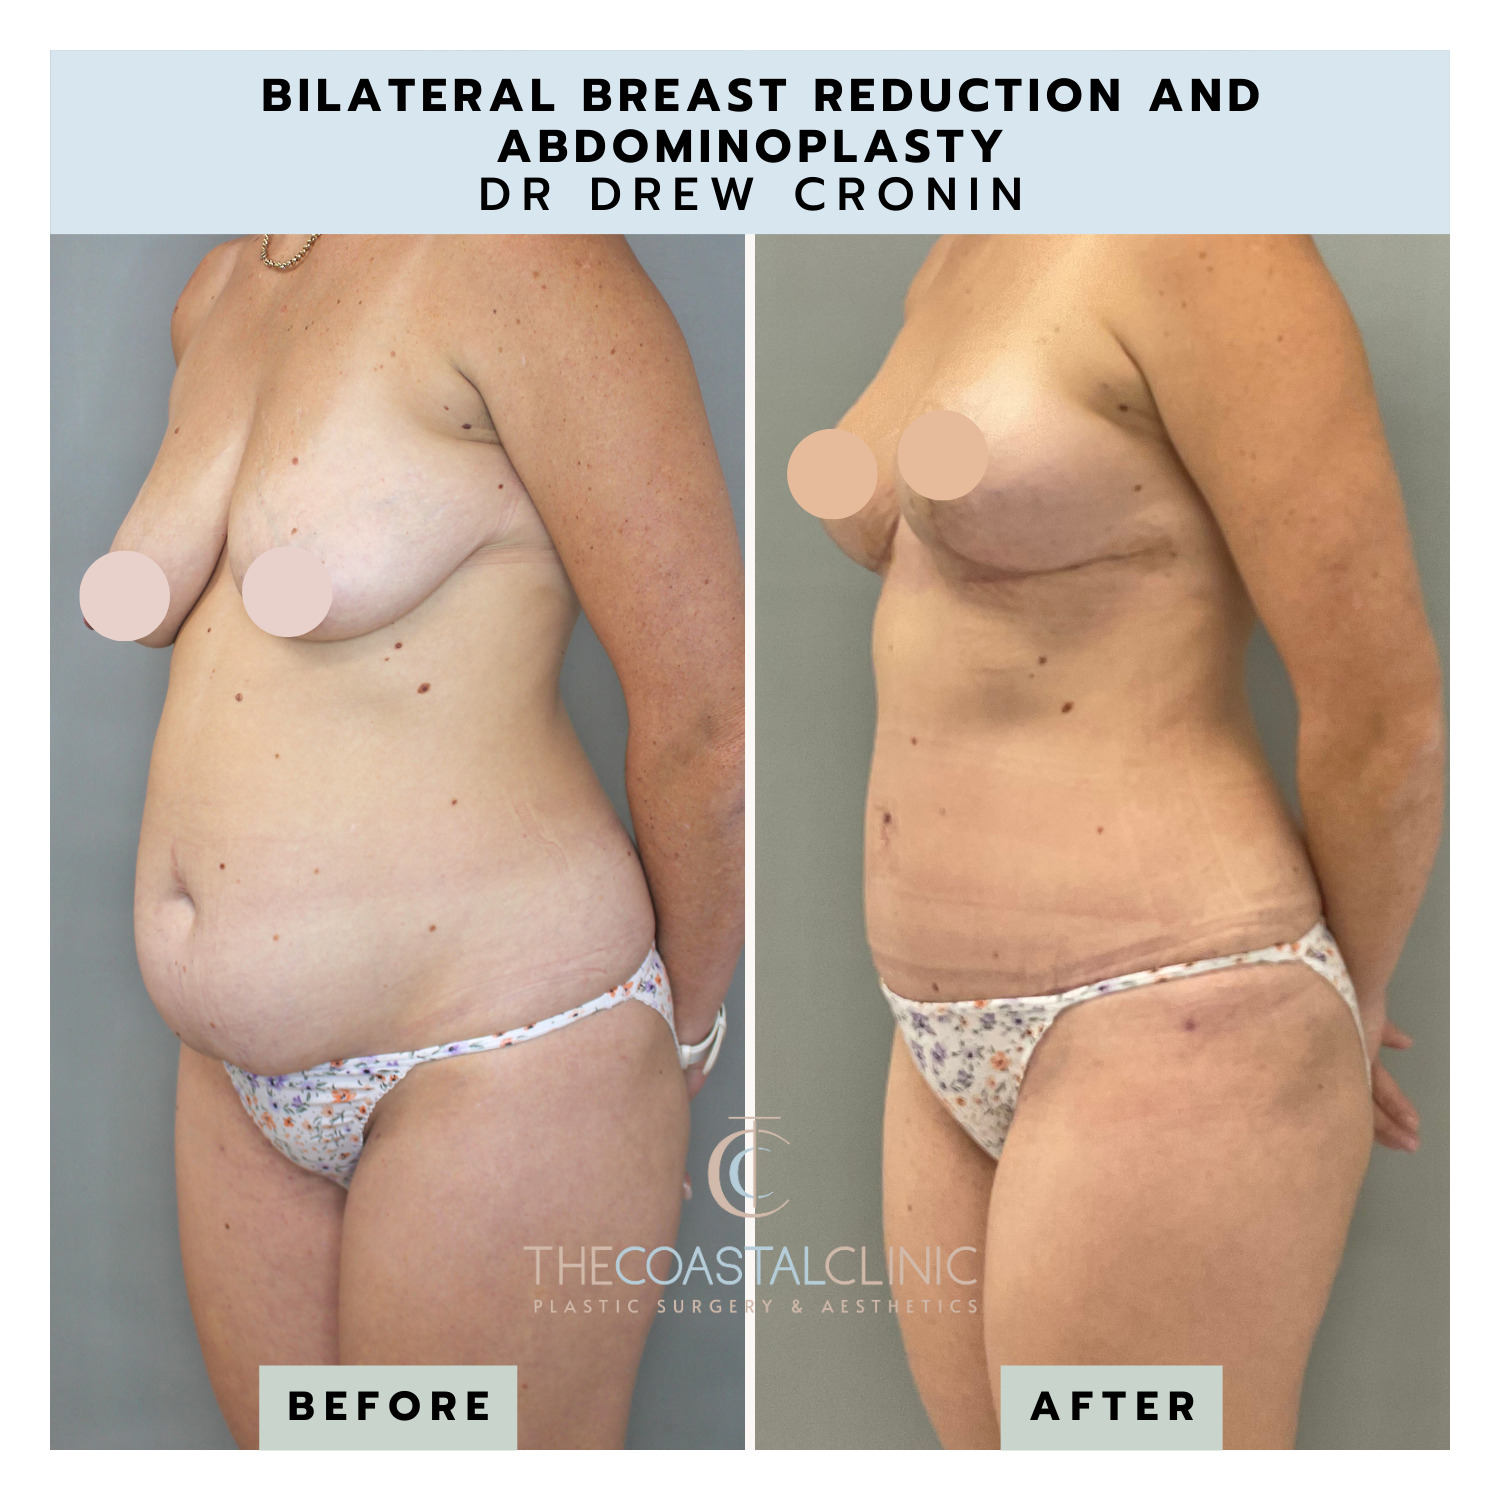 Breast Reduction Mammaplasty 1 year results Cup size DDD >> small C  #breastreduction #mammaplasty #plasticsurgery